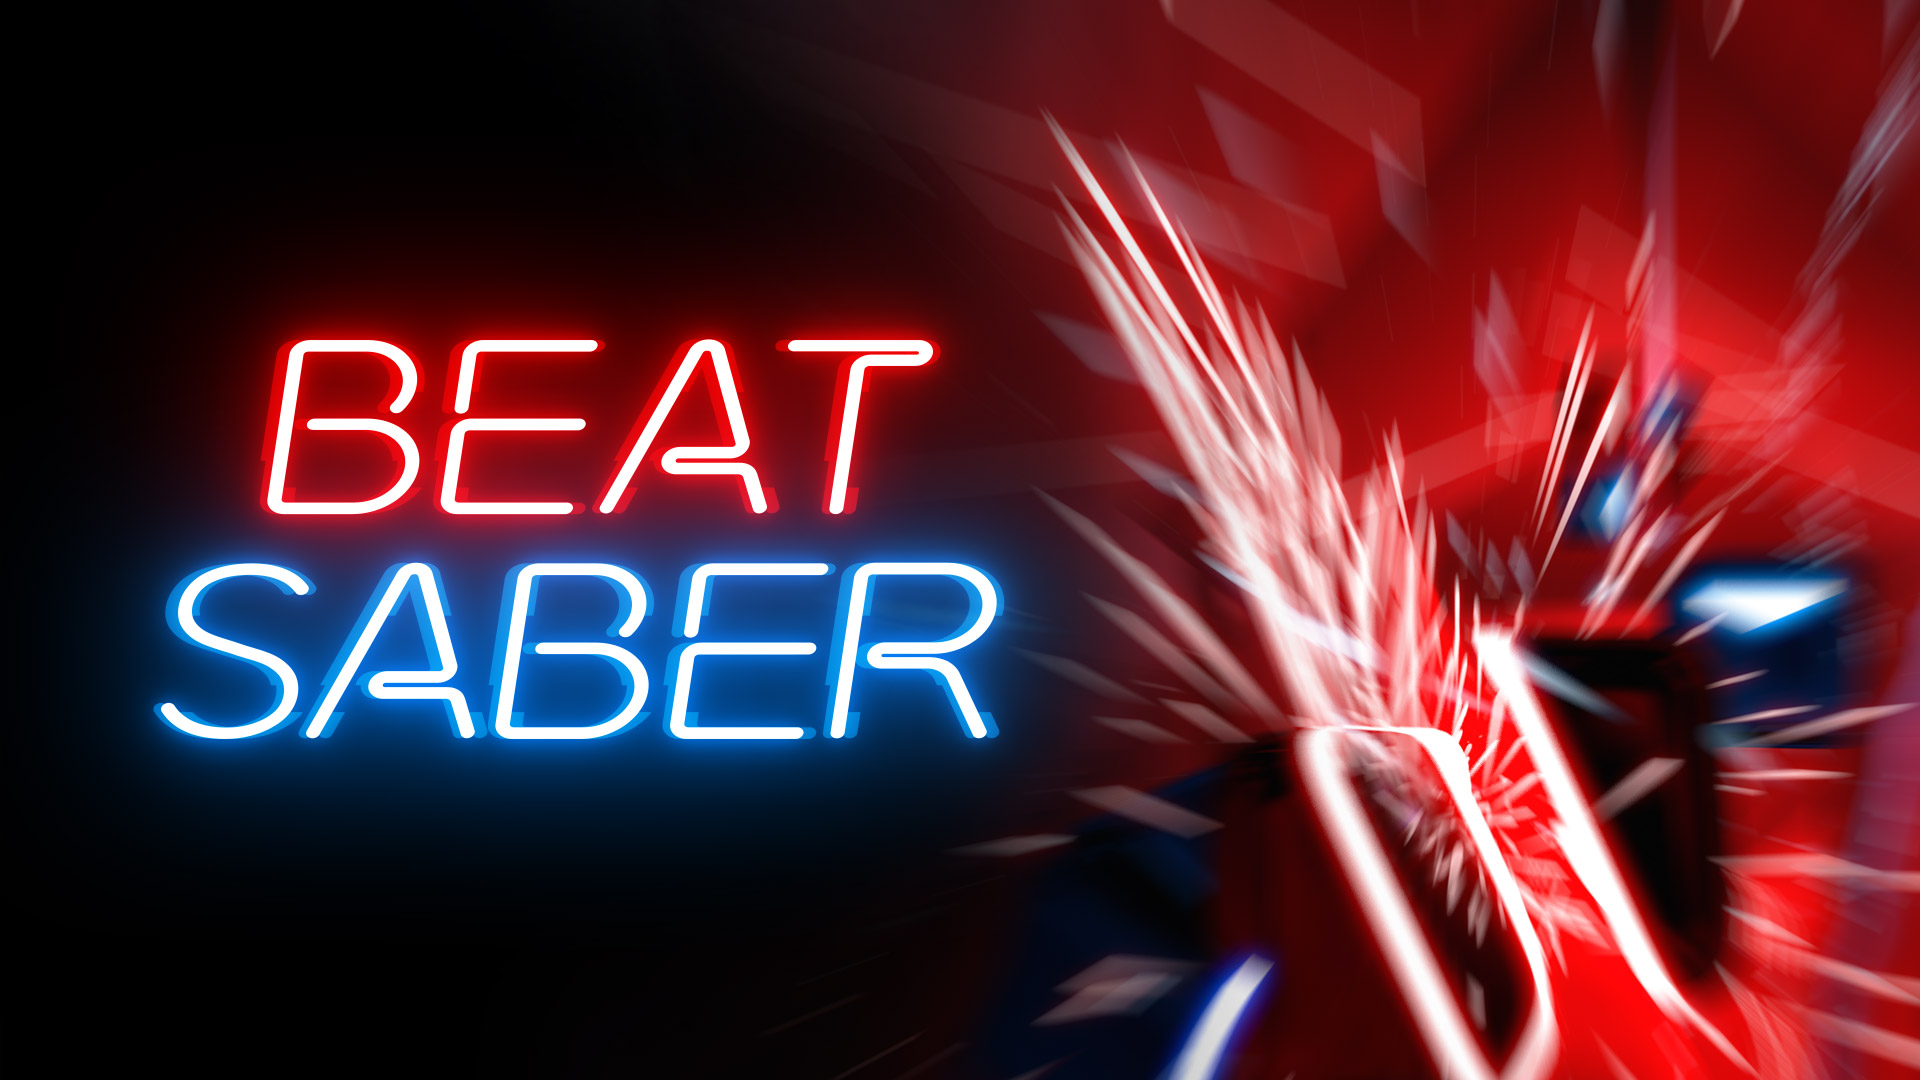 ‘Beat Saber’ Reportedly Generated Over a Quarter Billion Dollars in Lifetime Sales – Road to VR